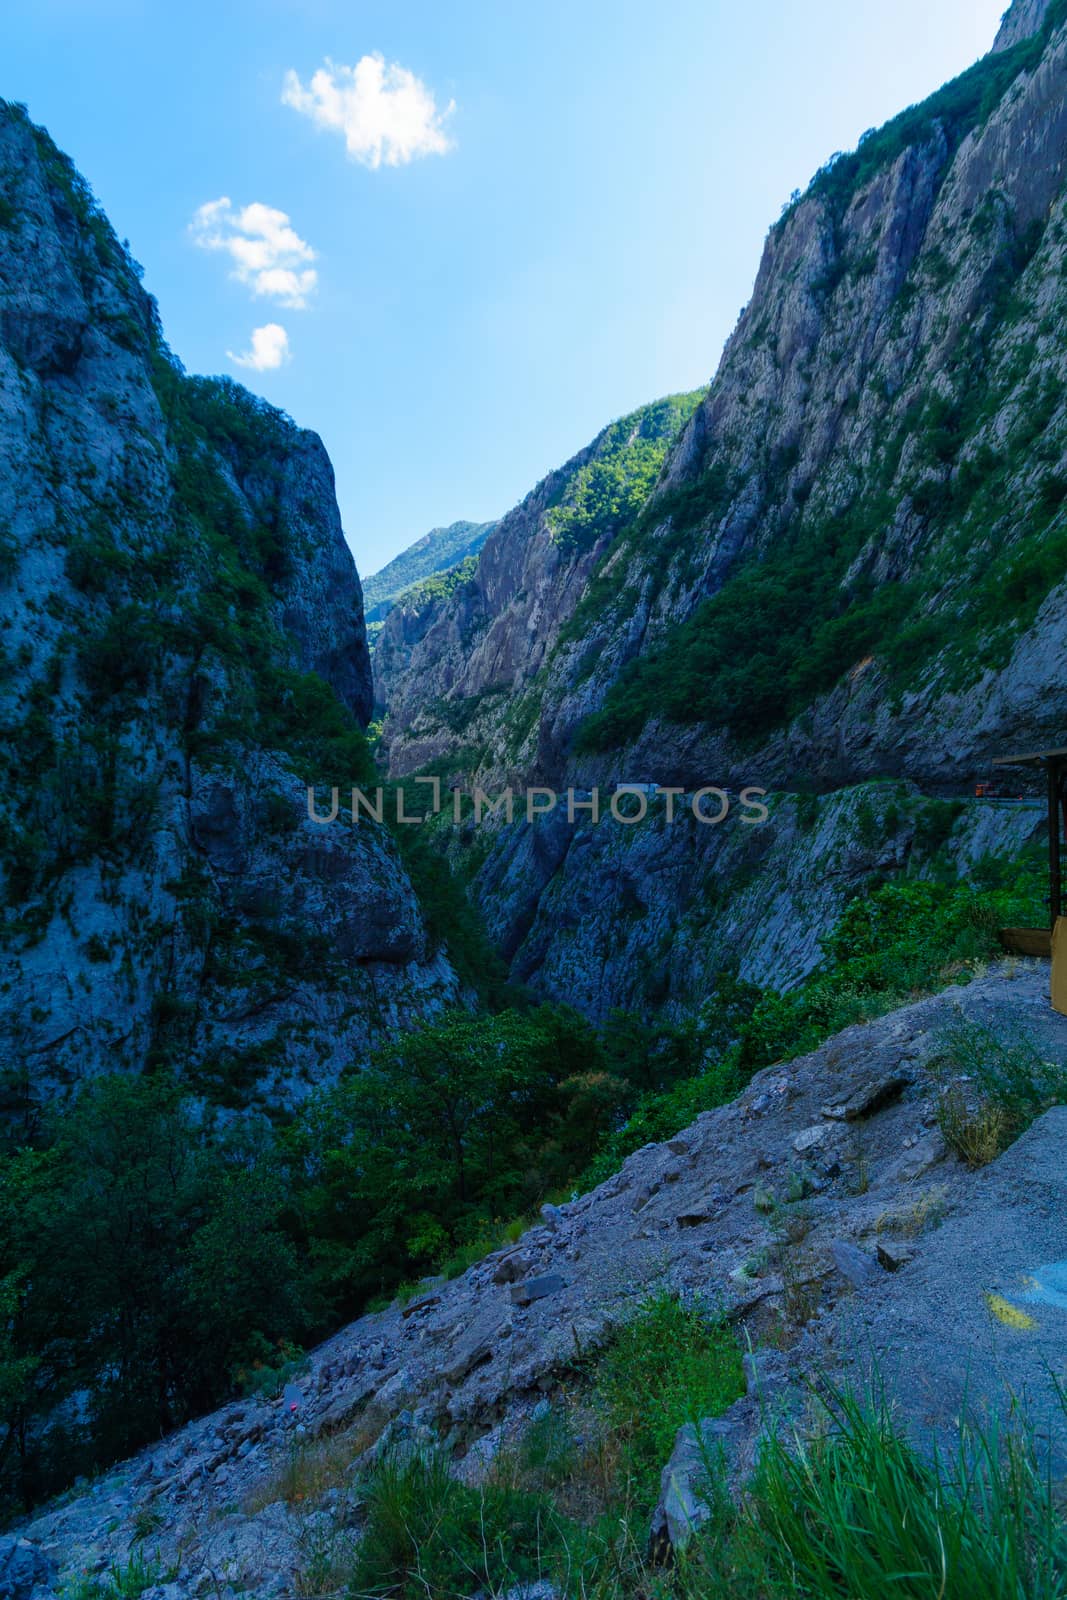 View of the Moraca River and Canyon, and road no. 2. Montenegro